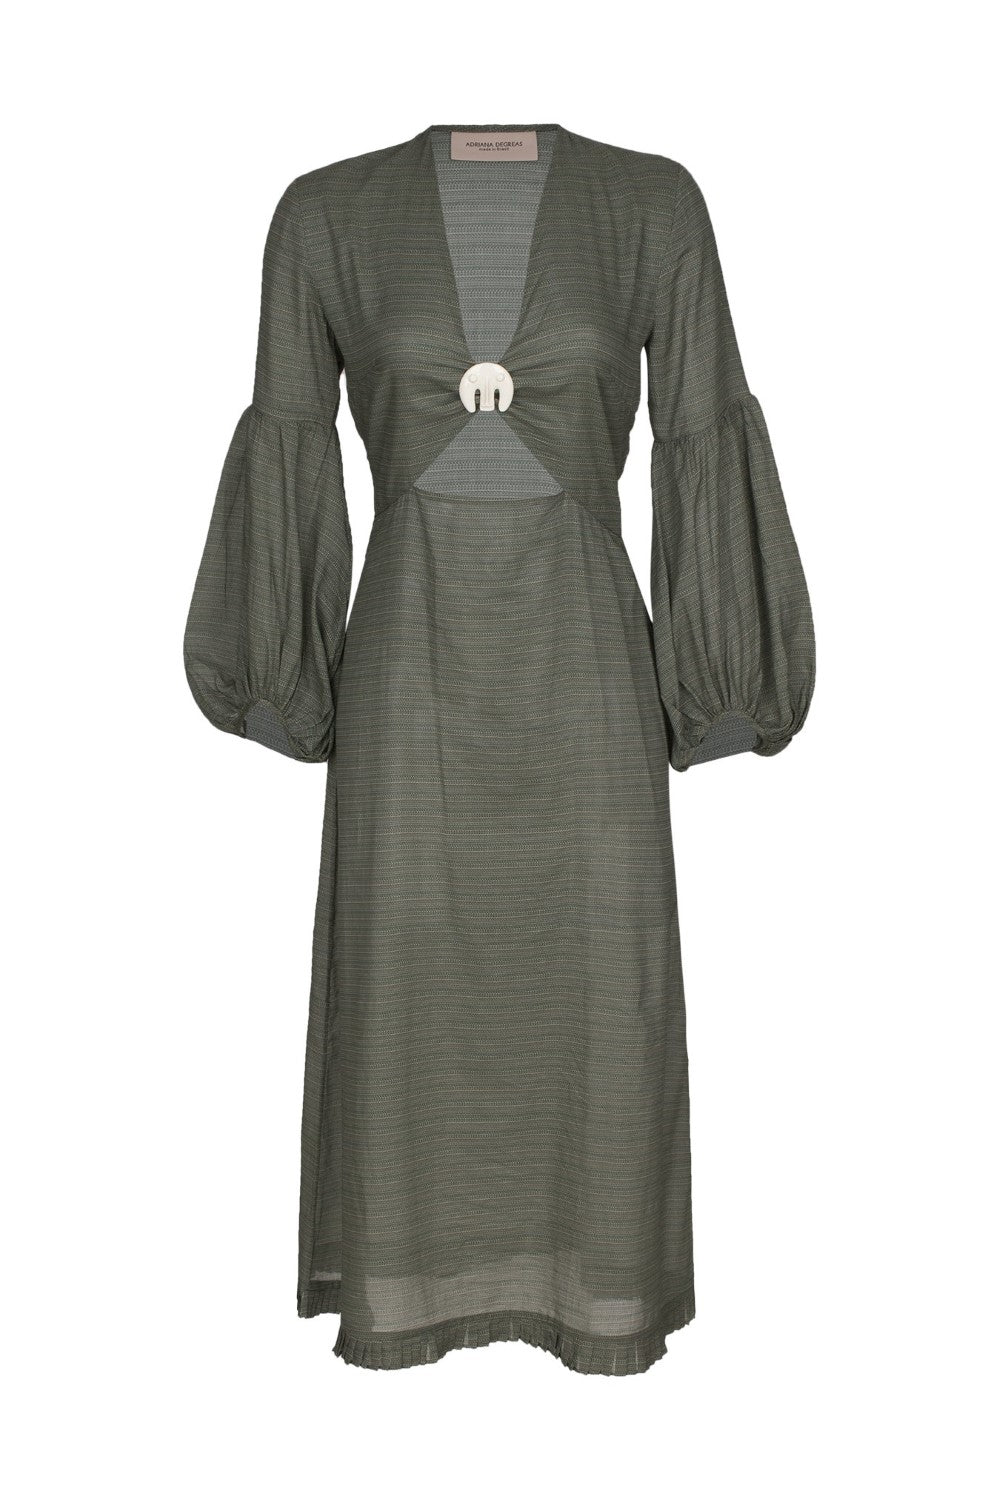 This dress can be worn as a cover up while lounging poolside or teamed with flat sandals for city walks